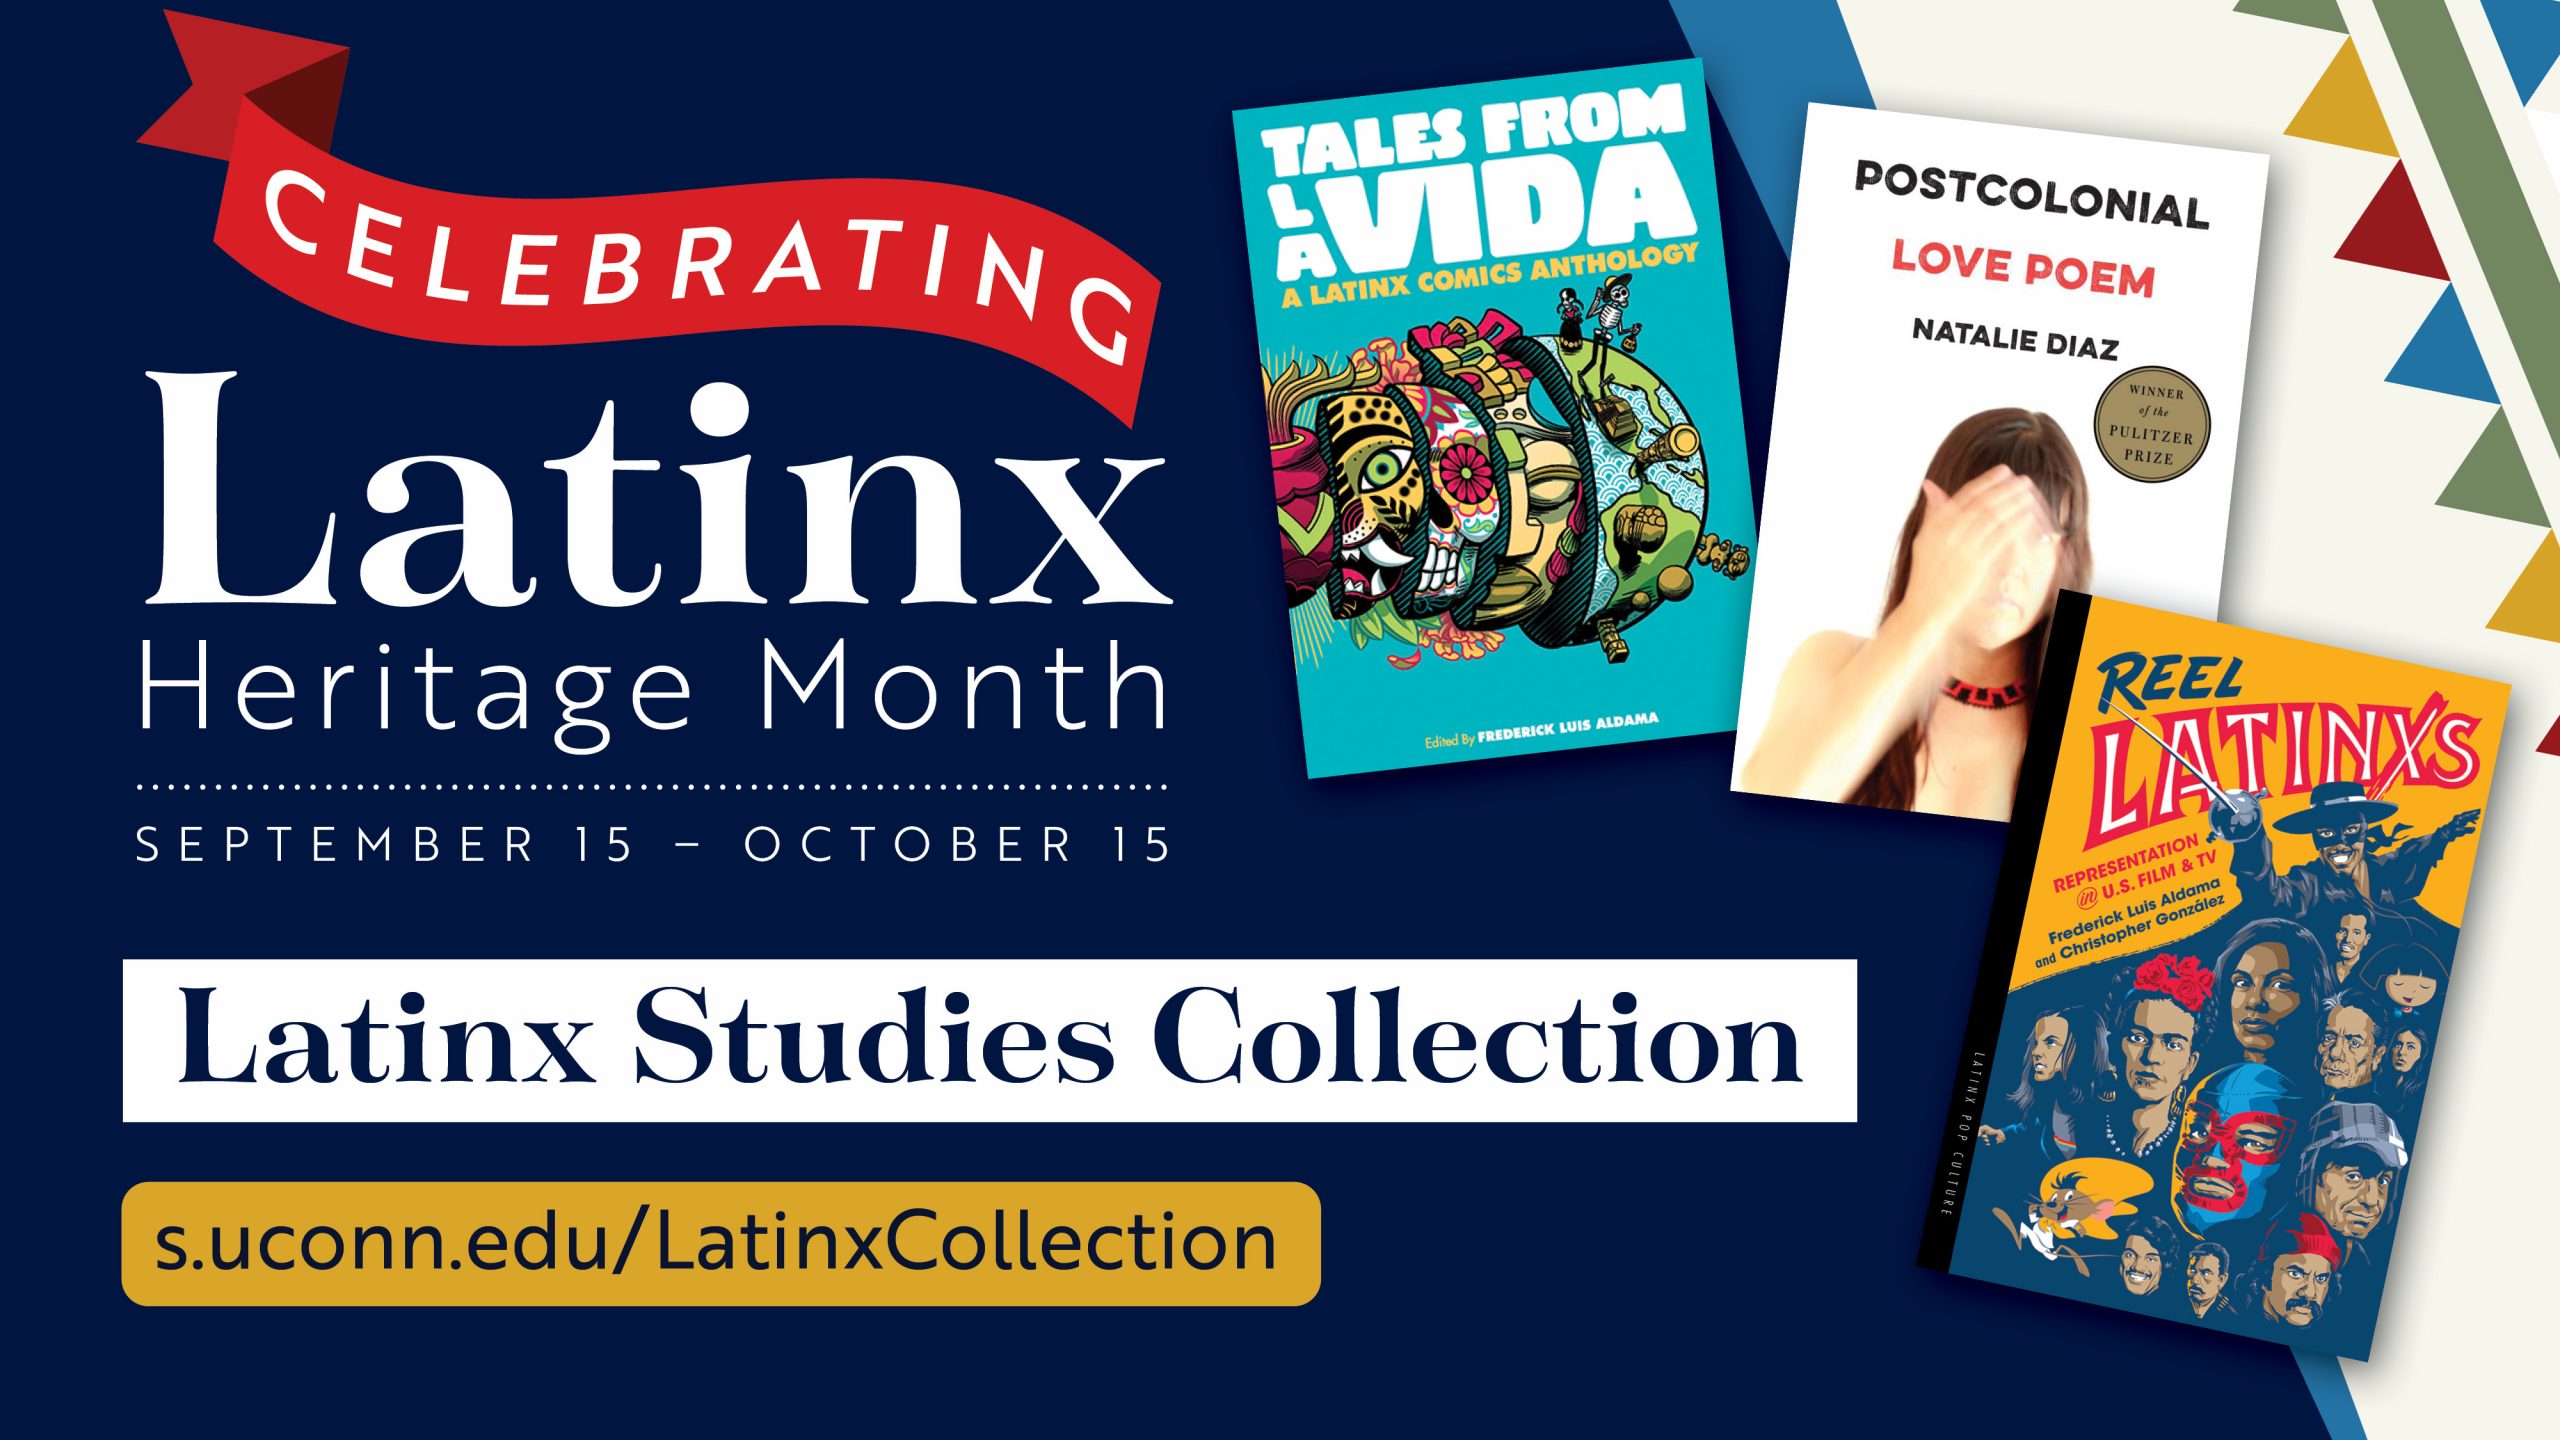 Marketing screen with abstract colored banners and images of three book covers: Tales from la Vida: A Latinx Comics Anthology, Postcolonial Love Poem by Natalie Diaz, and Reel Latinxs: Representation in U.S. Film and TV Book by Christopher González and Frederick Luis Aldama, and the text “Celebrating Latinx Heritage Month. September 15- October 15. Latinx Studies Collection. s.uconn.edu/LatinxCollection".